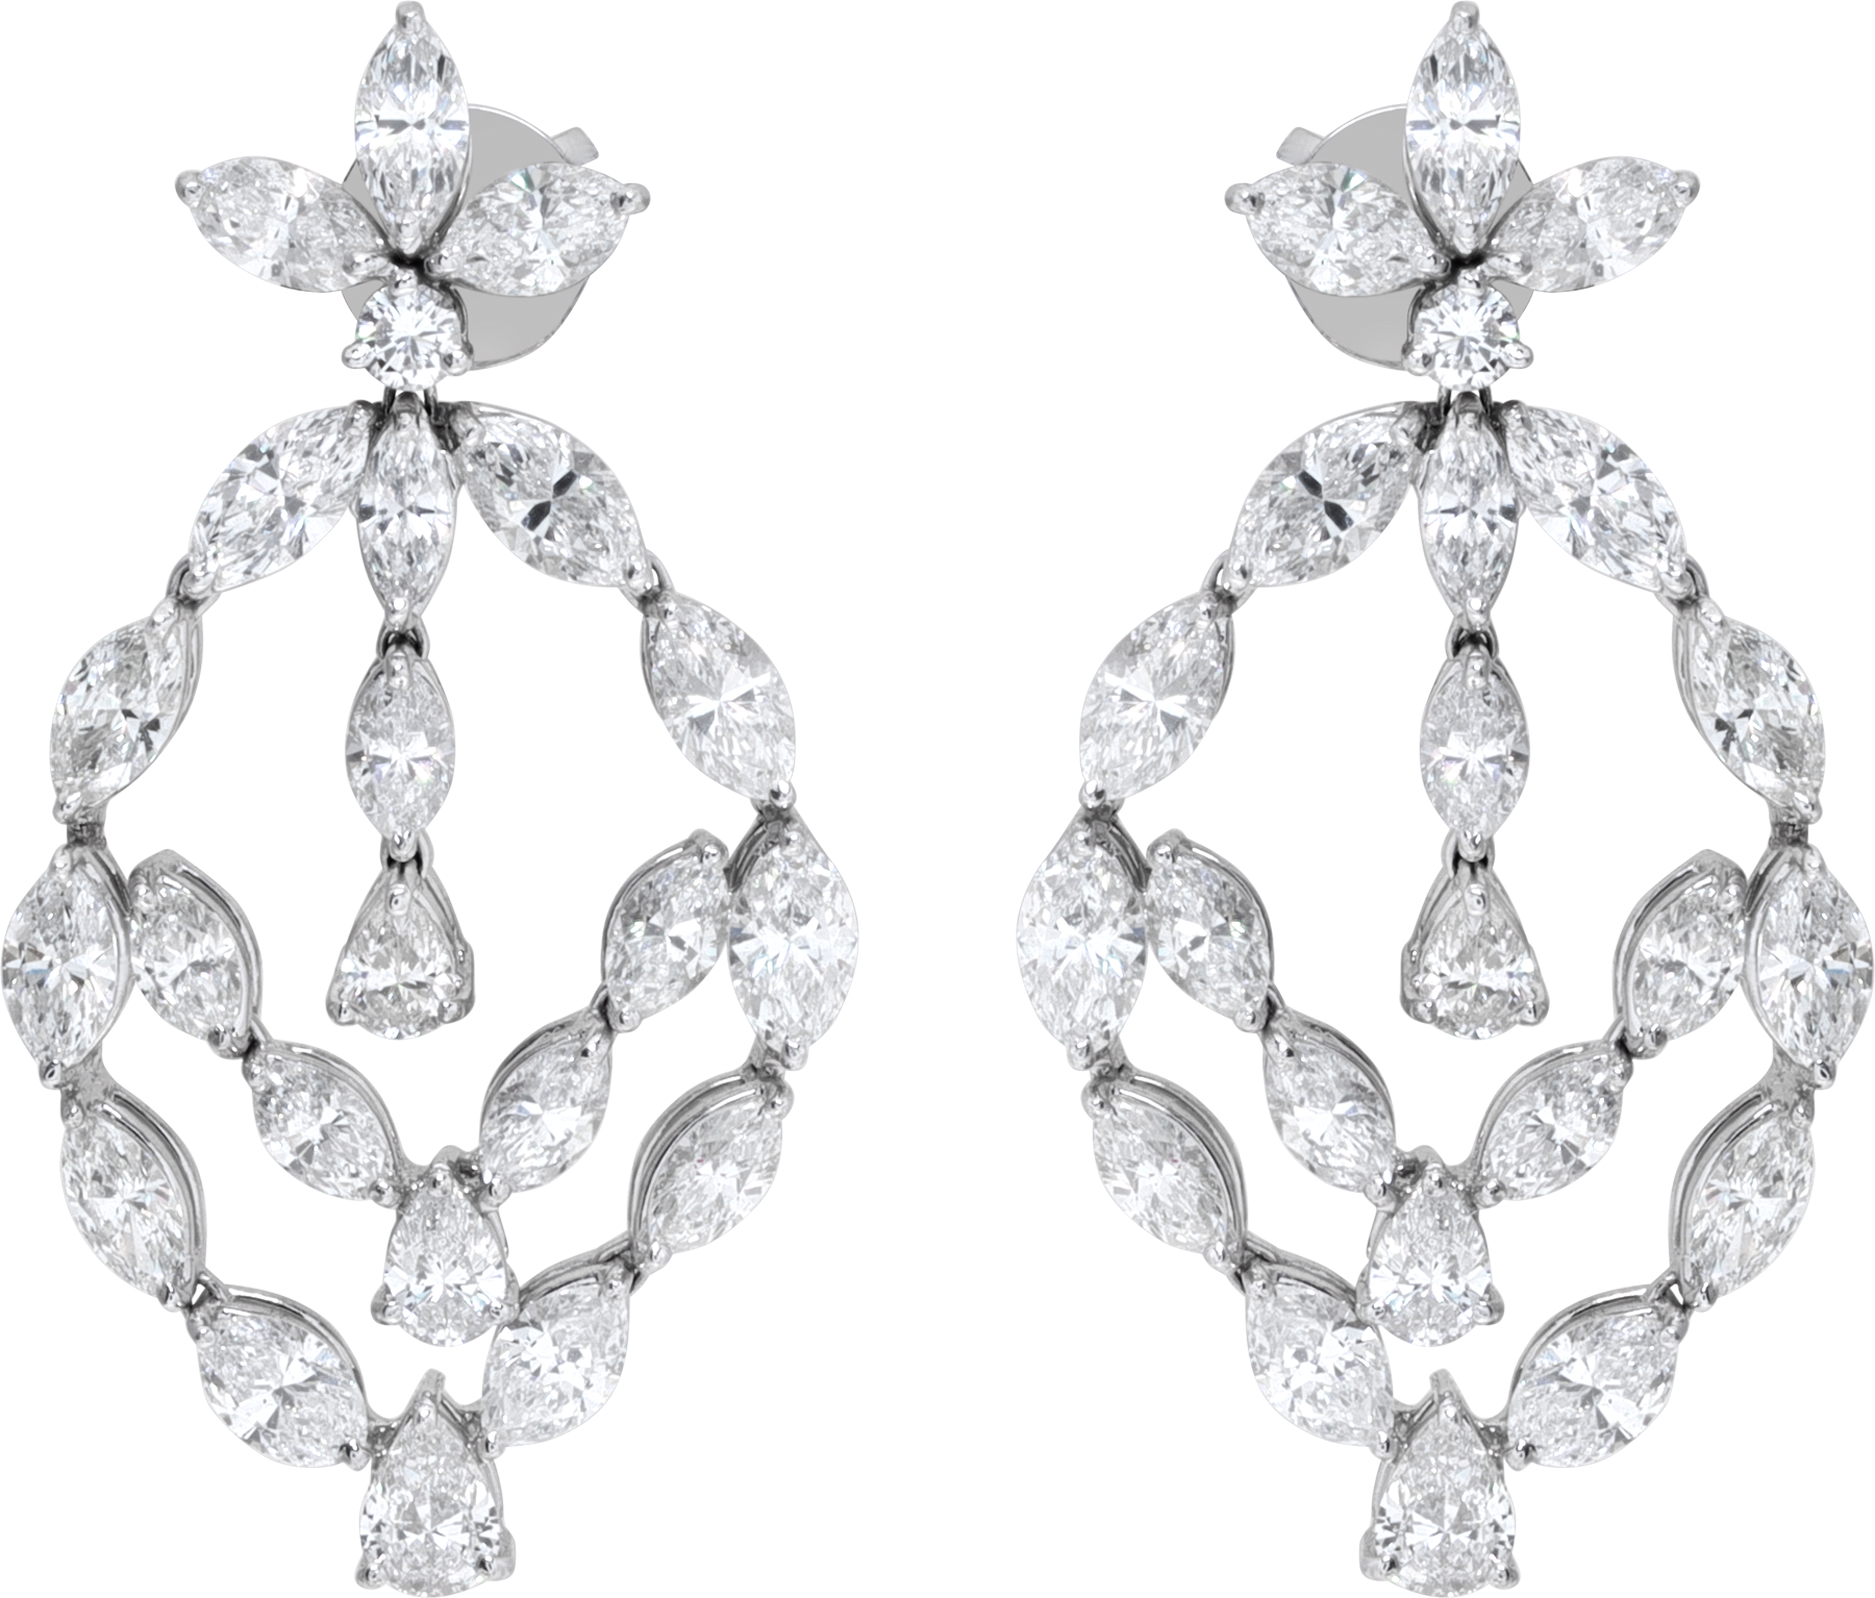 Brilliant cut marquise and pear shape diamond earrings in 18k white gold.Total Approx. weight: 13.08 carats.